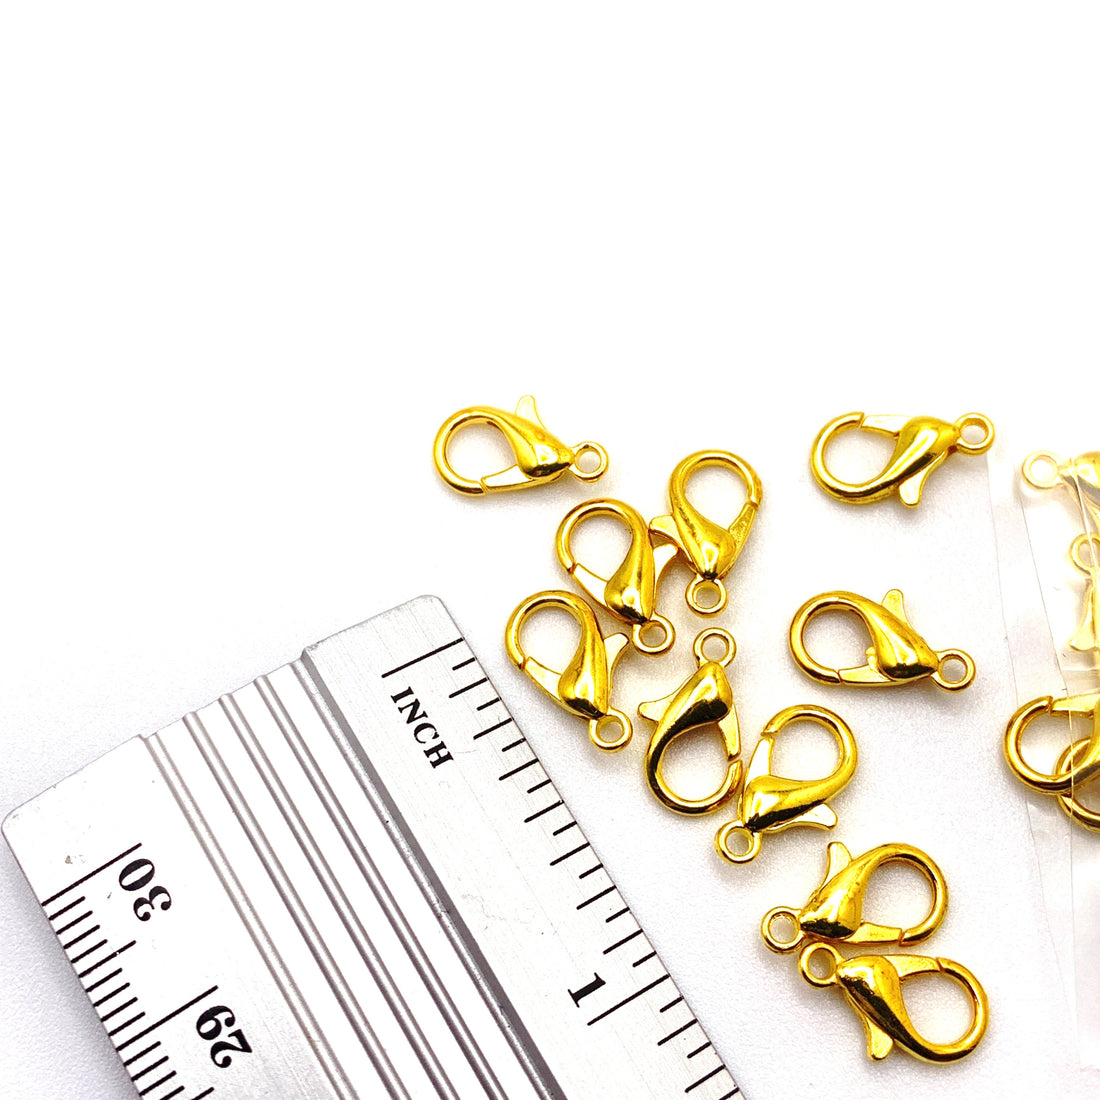 12x7mm Lobster Claw Clasp Findings, Golden Colour - 20 Pack – Easy